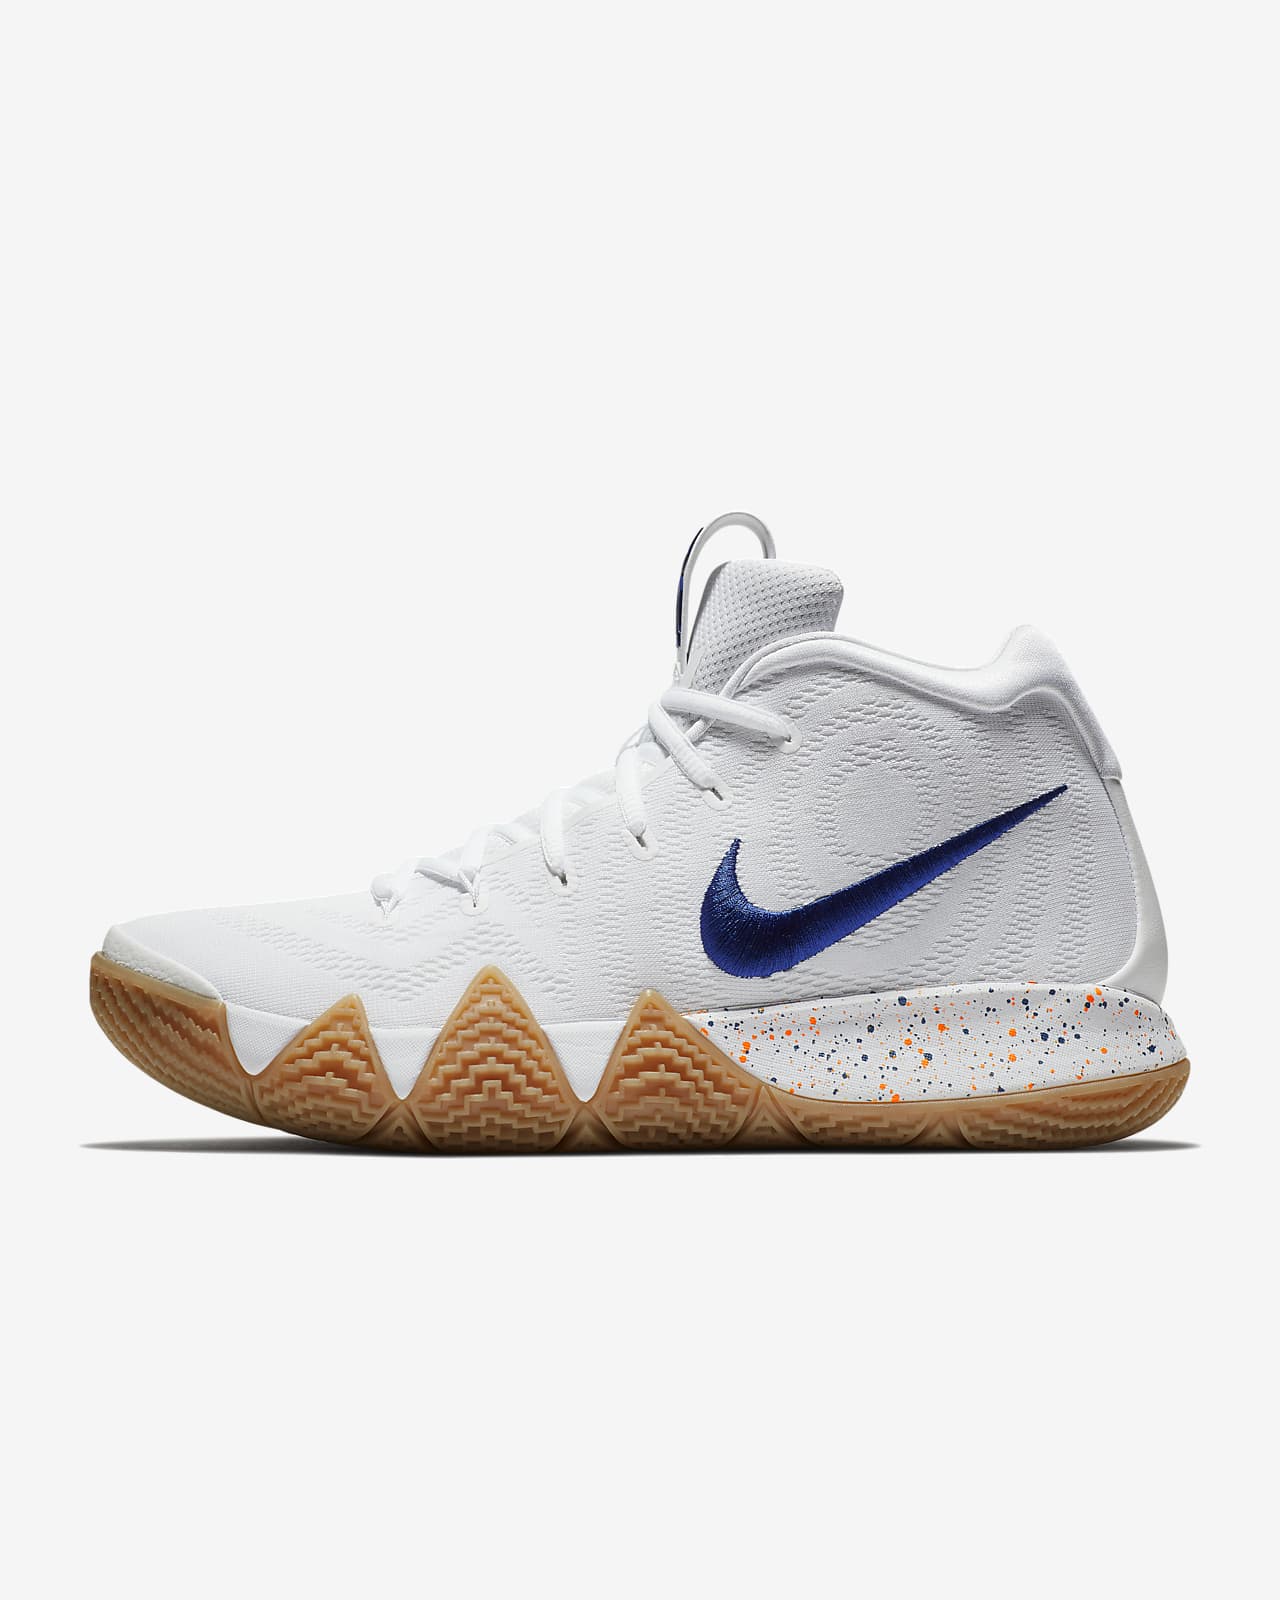 kyrie 4 white shoes